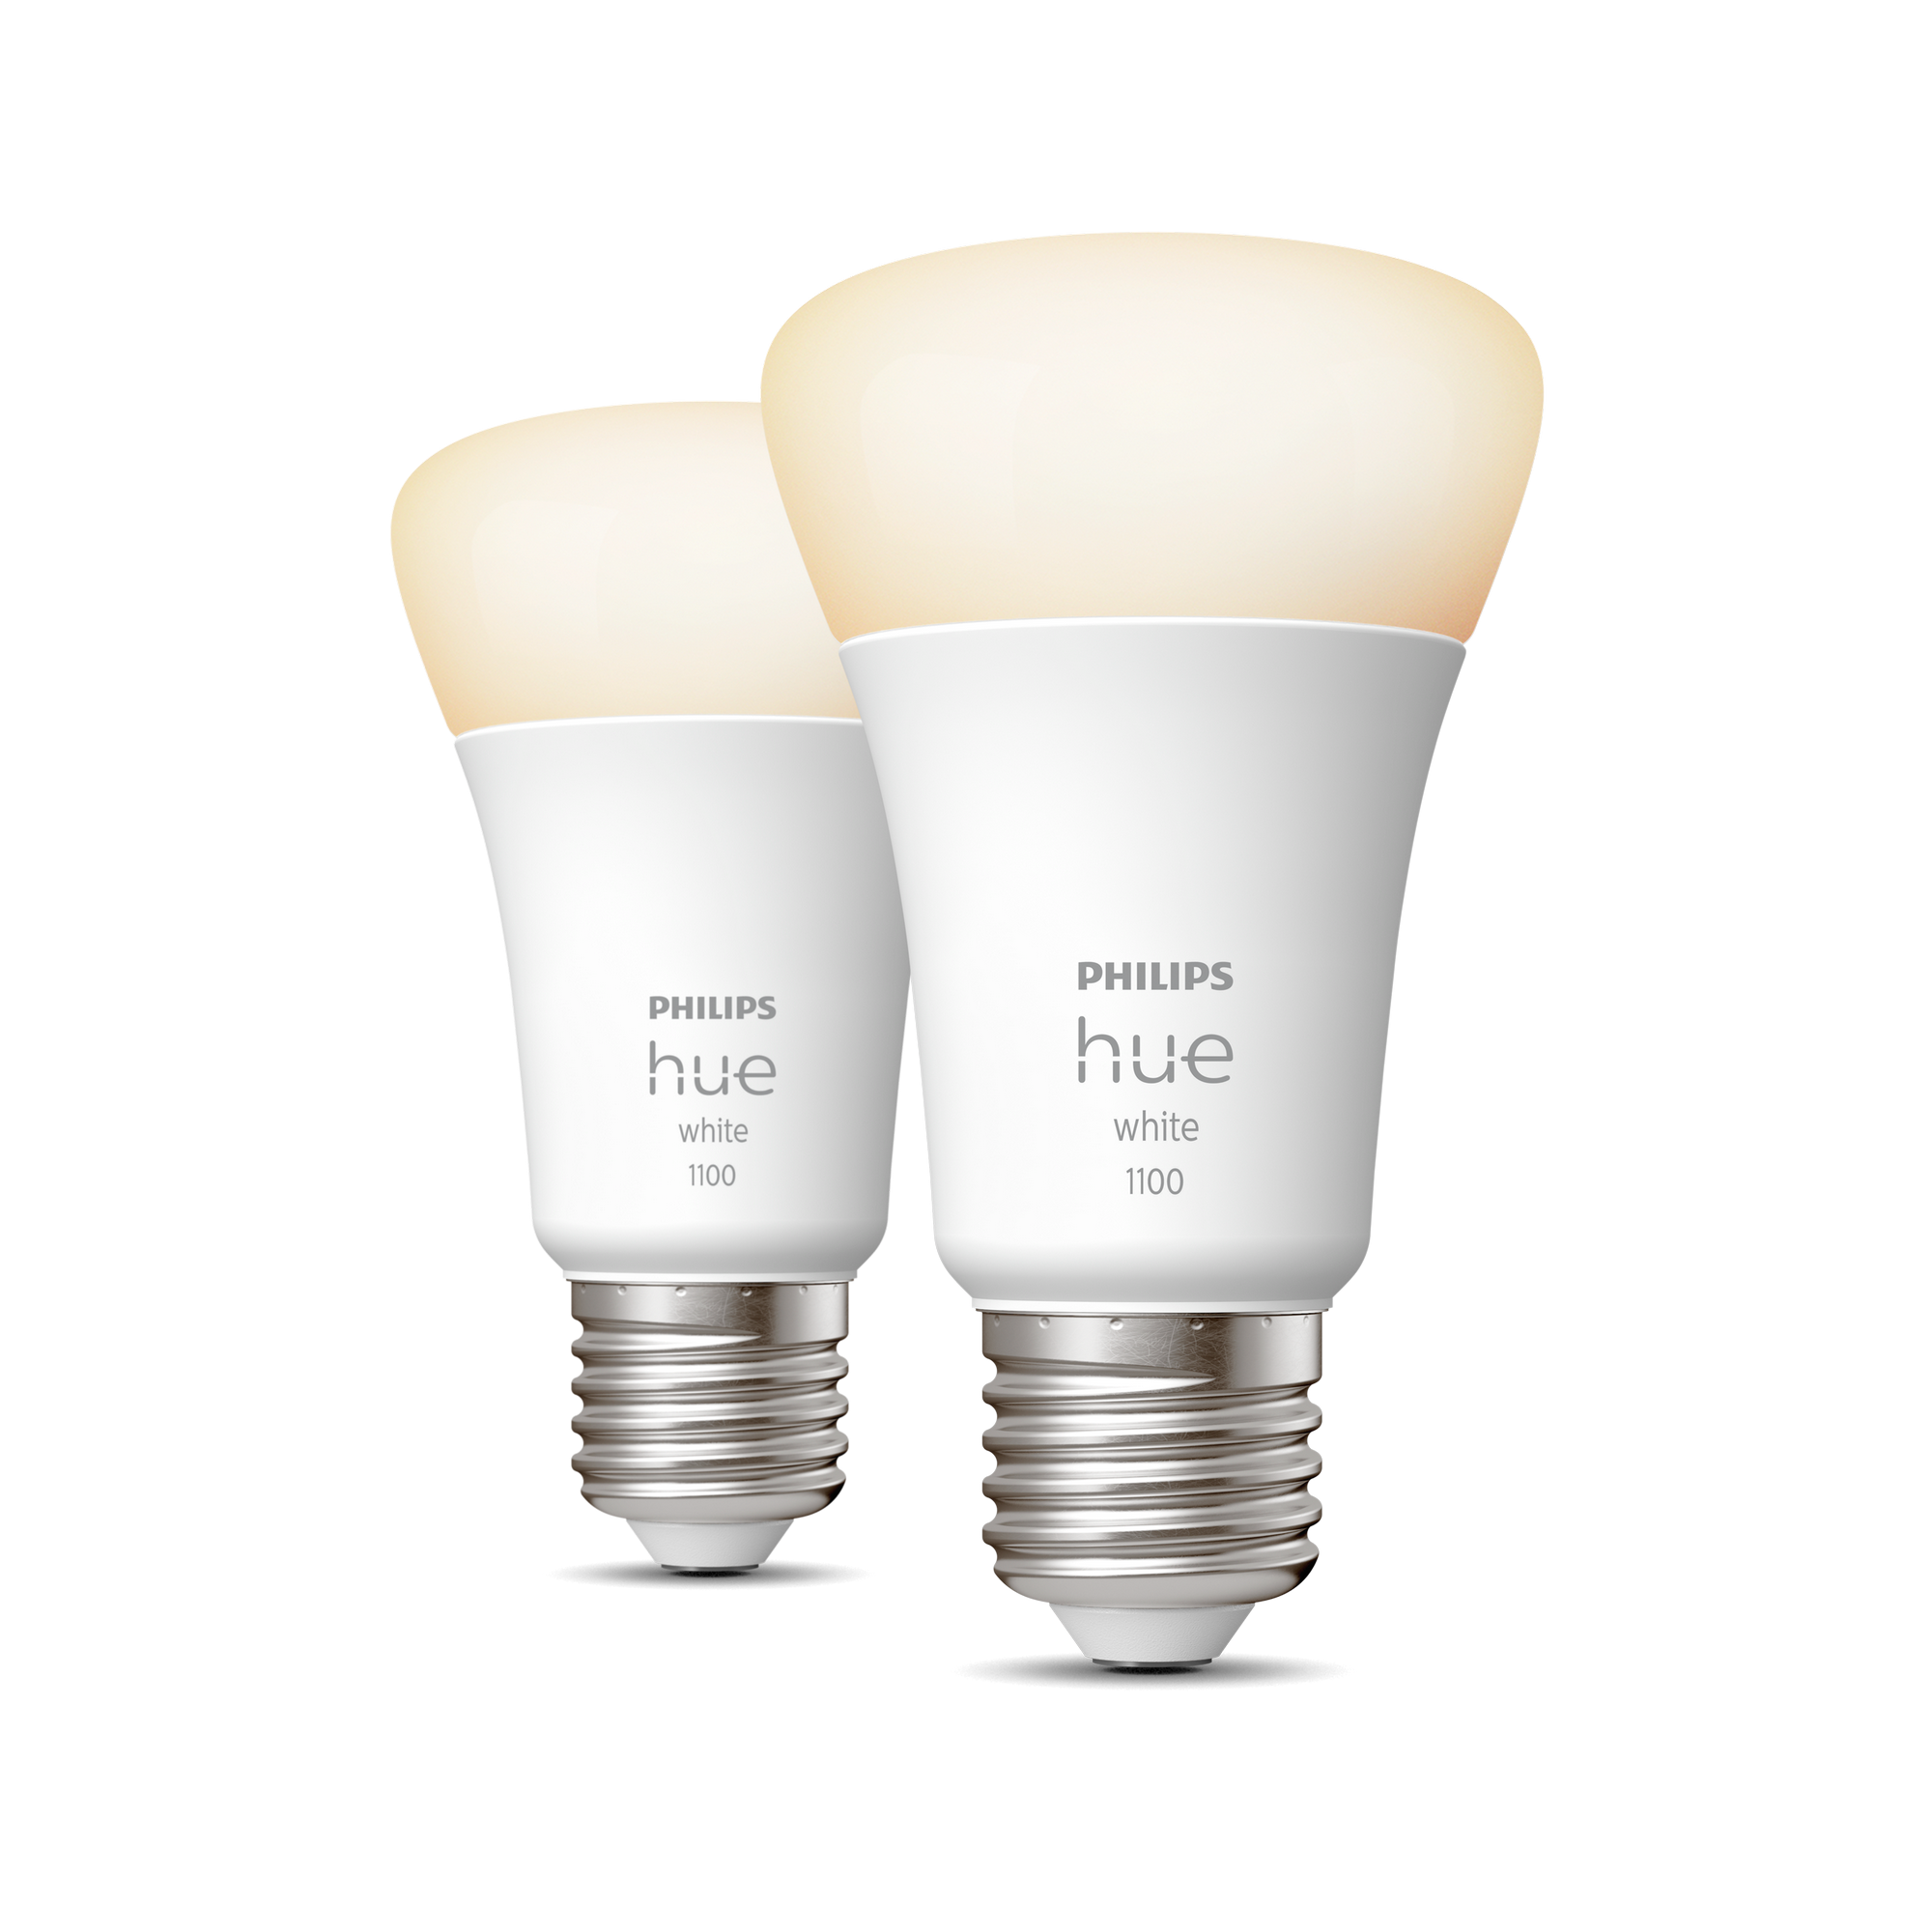 LED-Lampe 'Hue White' E27 9,5 W, 2er-Pack + product picture